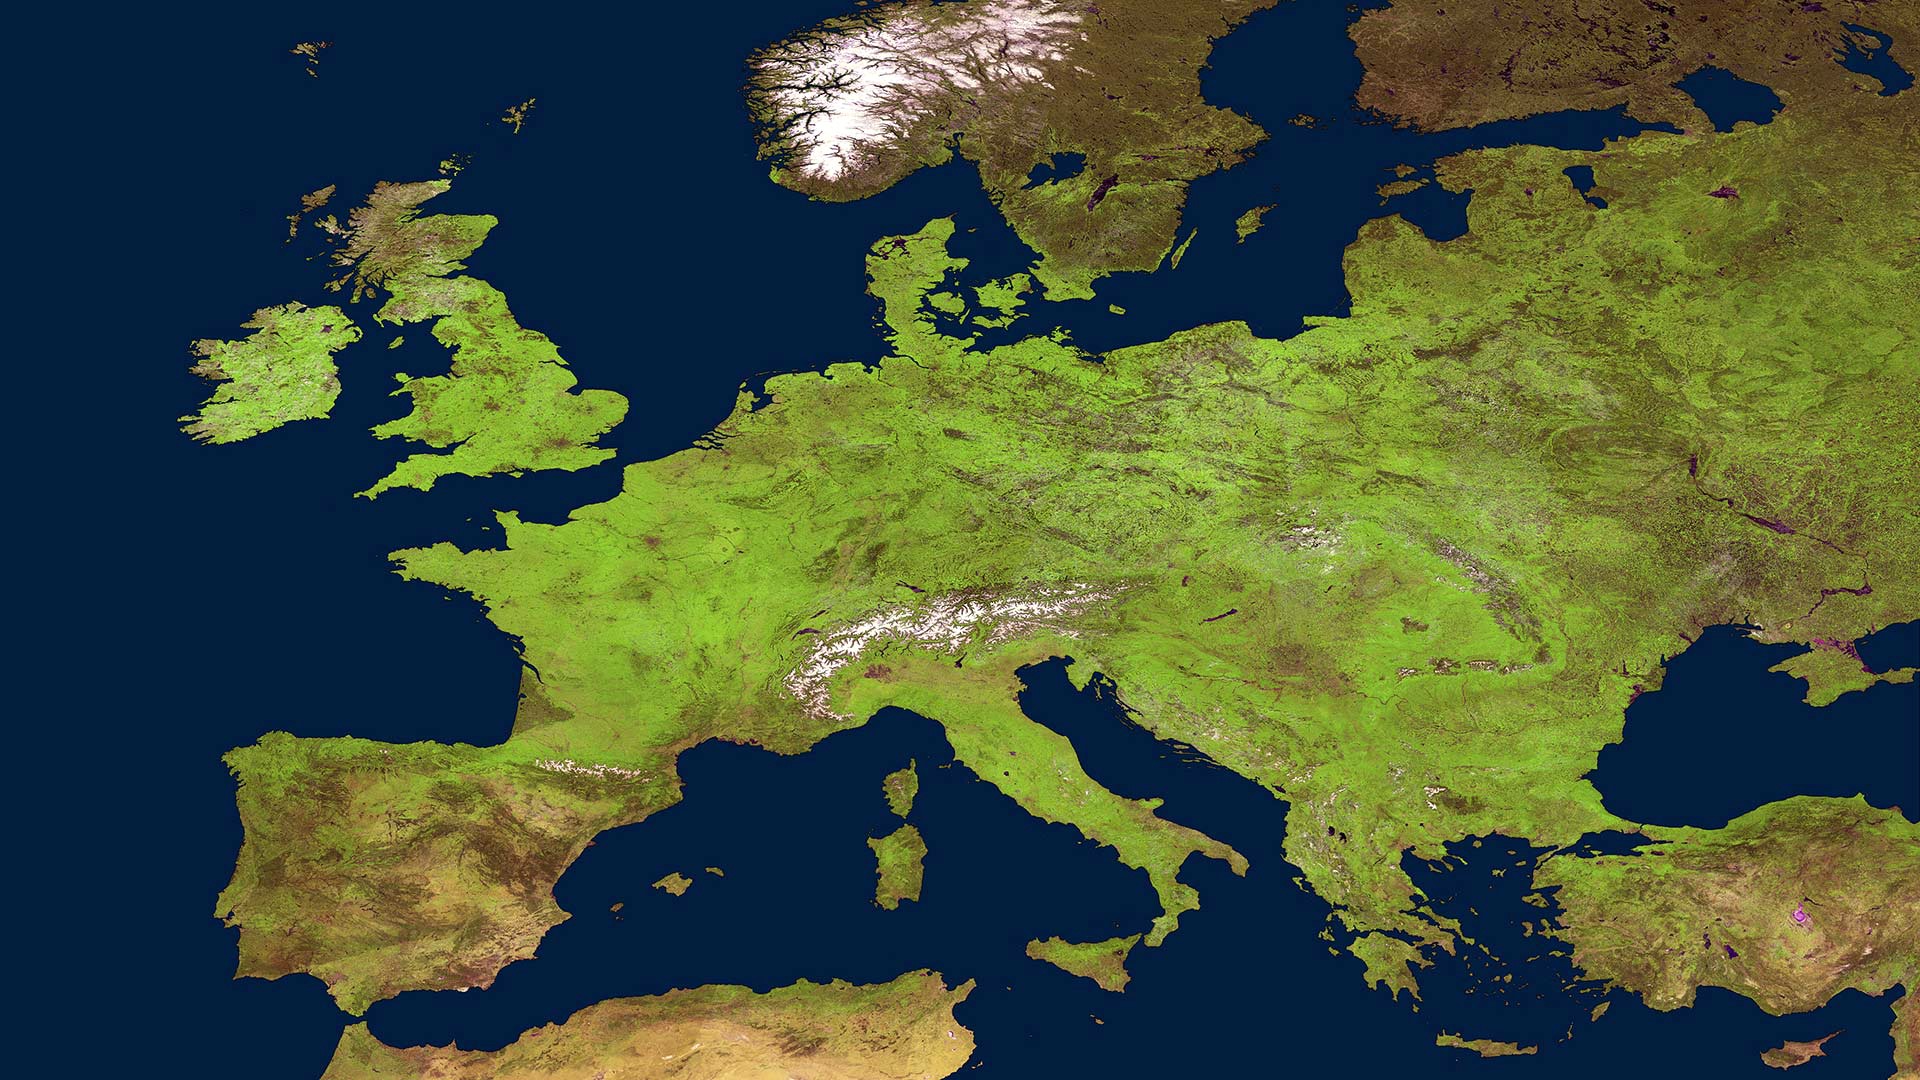 Wallpaper Map of Europe 1920x1080 Full HD 2K Picture, Image